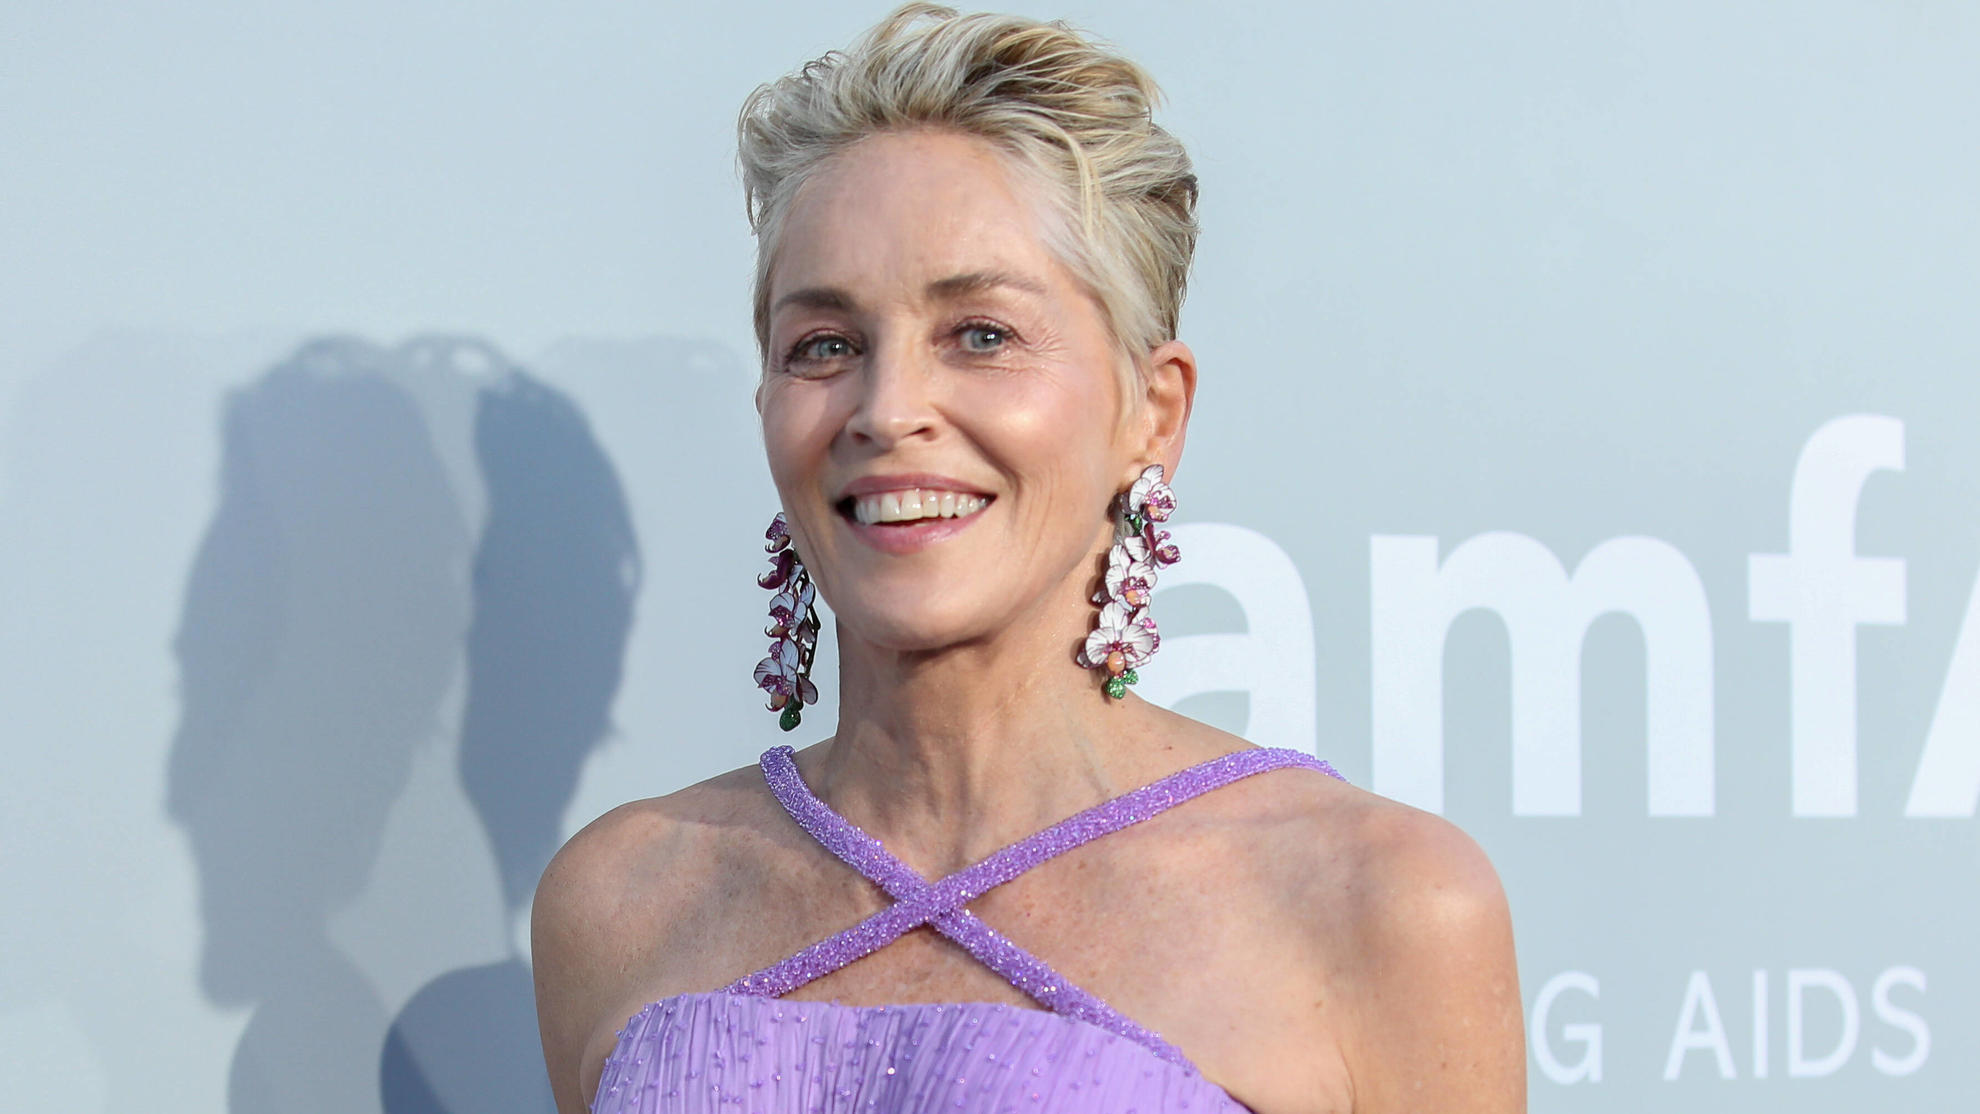  July 16, 2021, Antibes, Provence Alpes Cote d Azur, France: Sharon STONE attends the amfAR Gala 2021 during the 74th annual Cannes Film Festival on July 16th 2021 in Antibes, France Antibes France - ZUMAc179 20210716_zep_c179_089 Copyright: xMickael